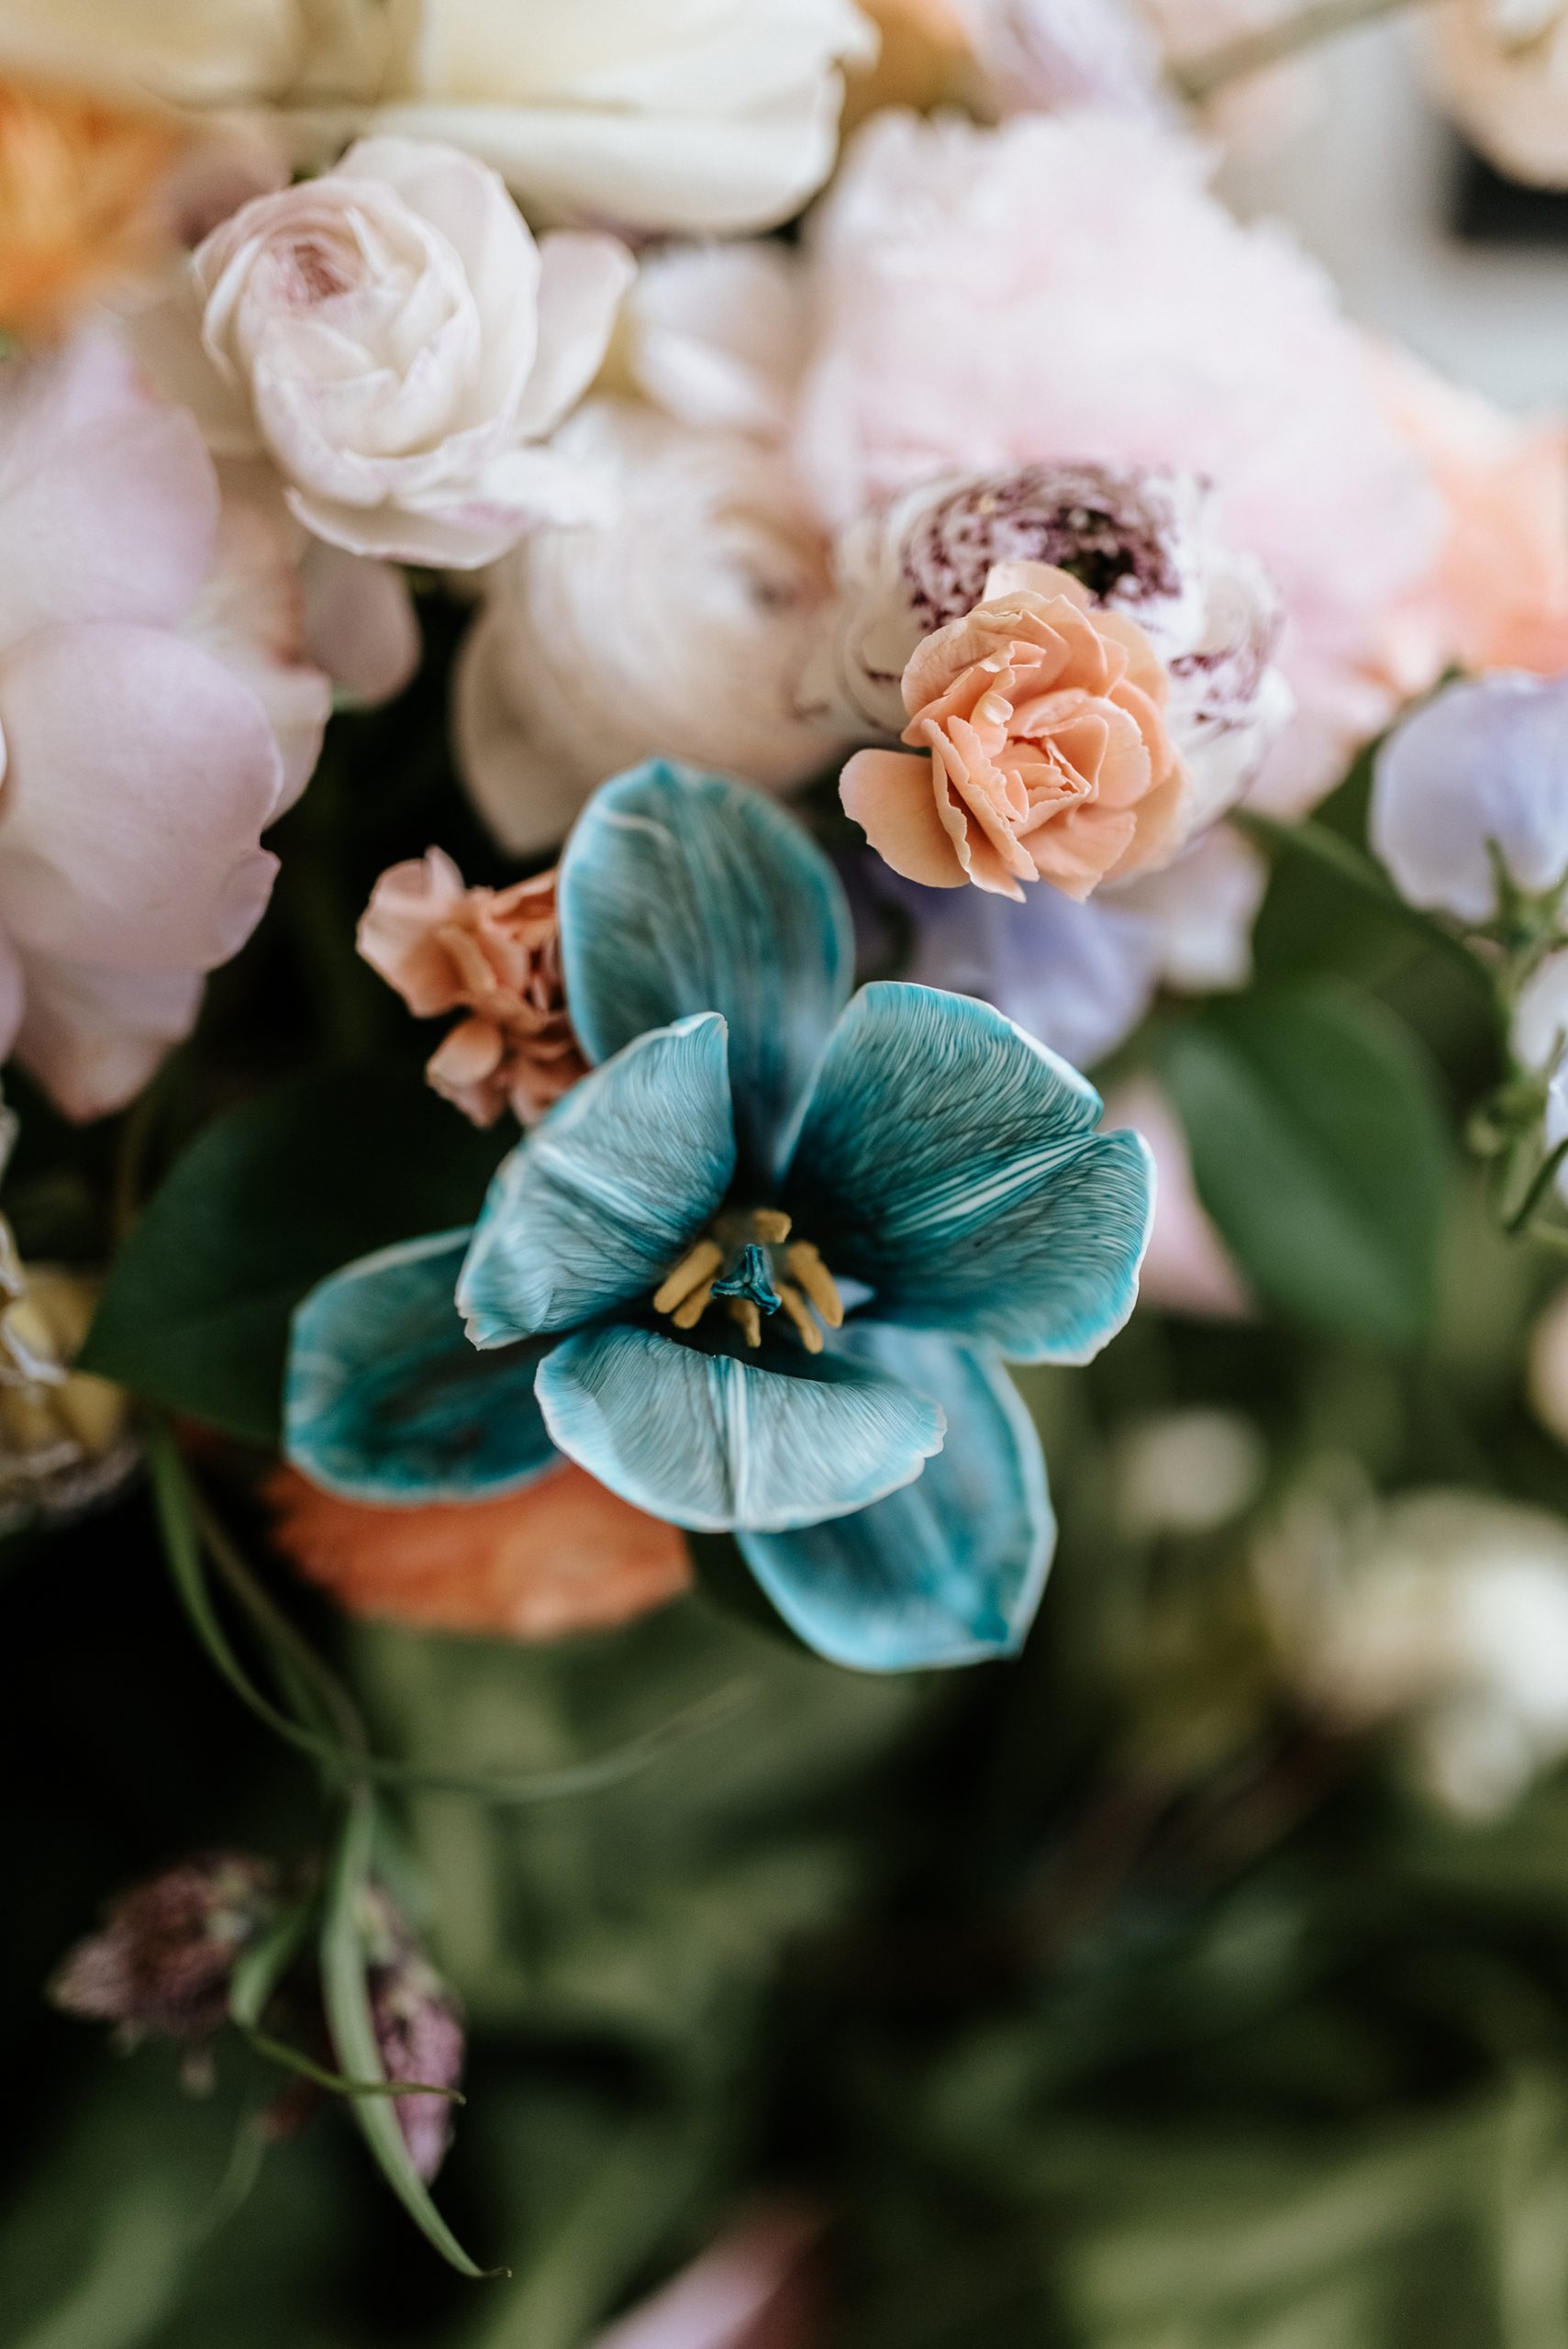 beautiful spring flower arrangments photographed by Heather K Purdy